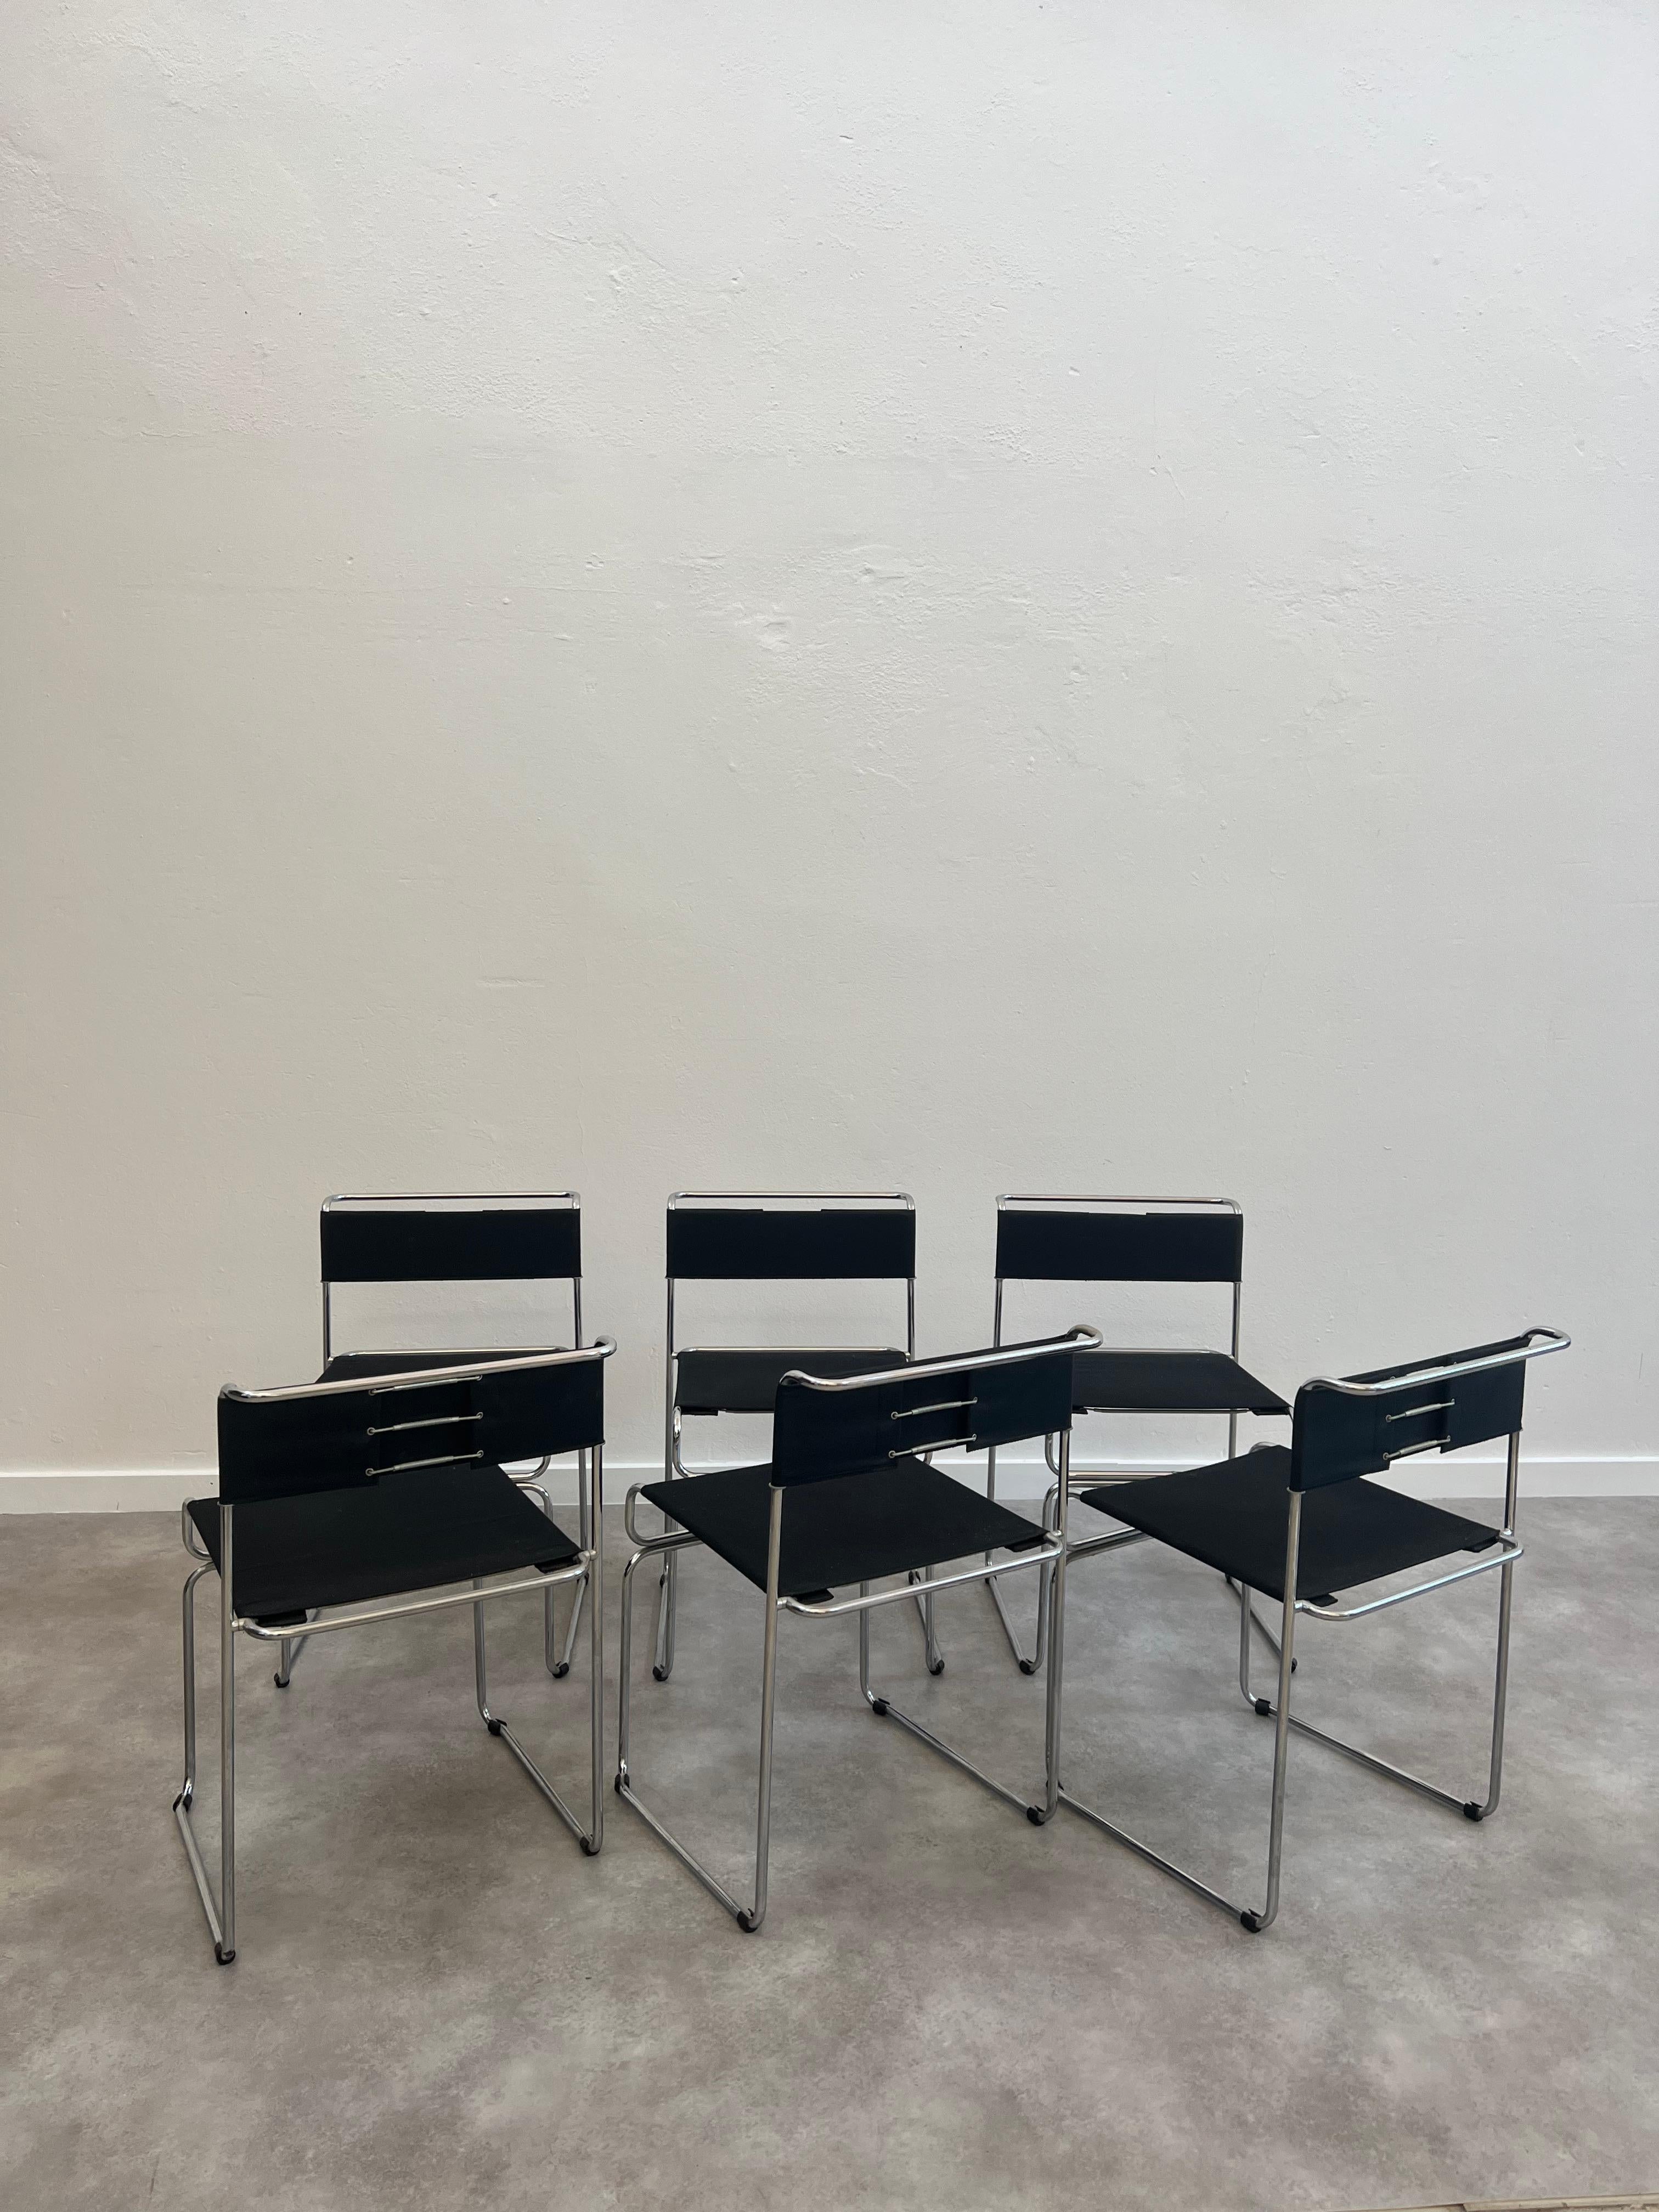 Late 20th Century Italian Chairs in Fabric and Chrome by Giovanni Carini for Planula